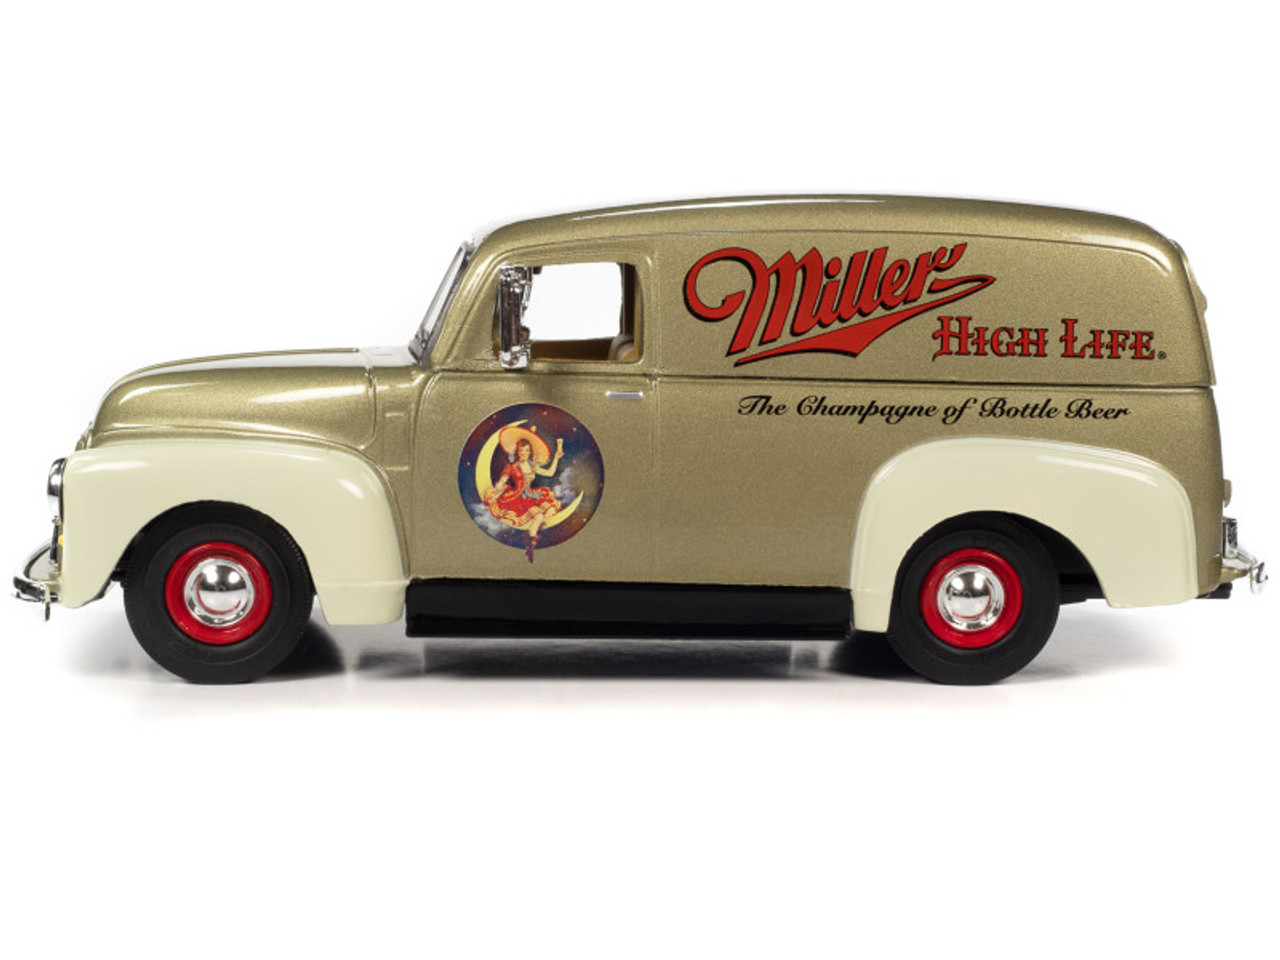 1951 GMC Sedan Delivery Gold Metallic and Beige "Miller High Life" and "Miller Girl in the Moon" Resin Figure 1/25 Diecast Model Car by Auto World